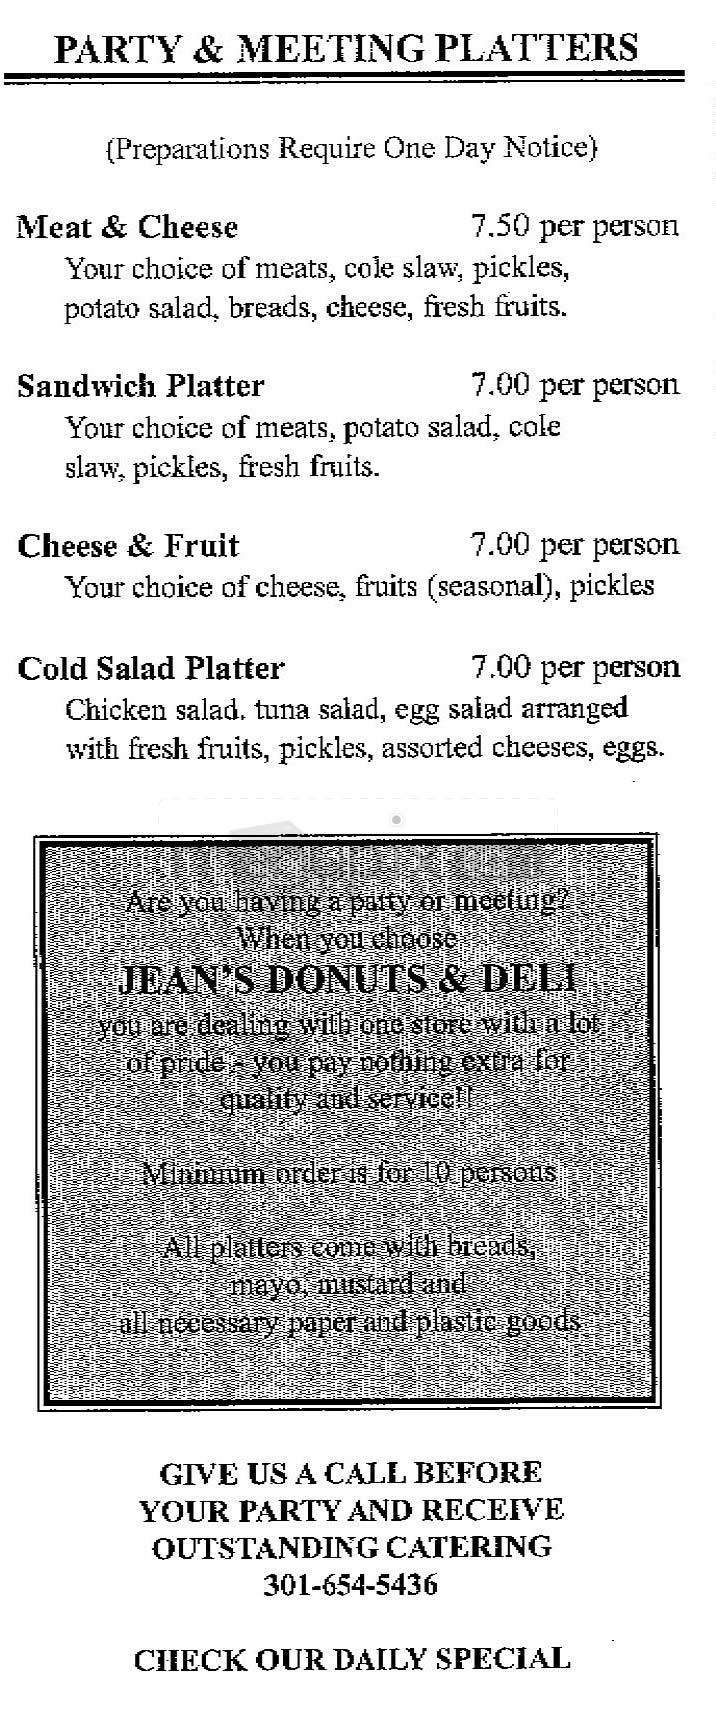 /502882/Jeans-Dounts-and-Deli-Bethesda-MD - Bethesda, MD